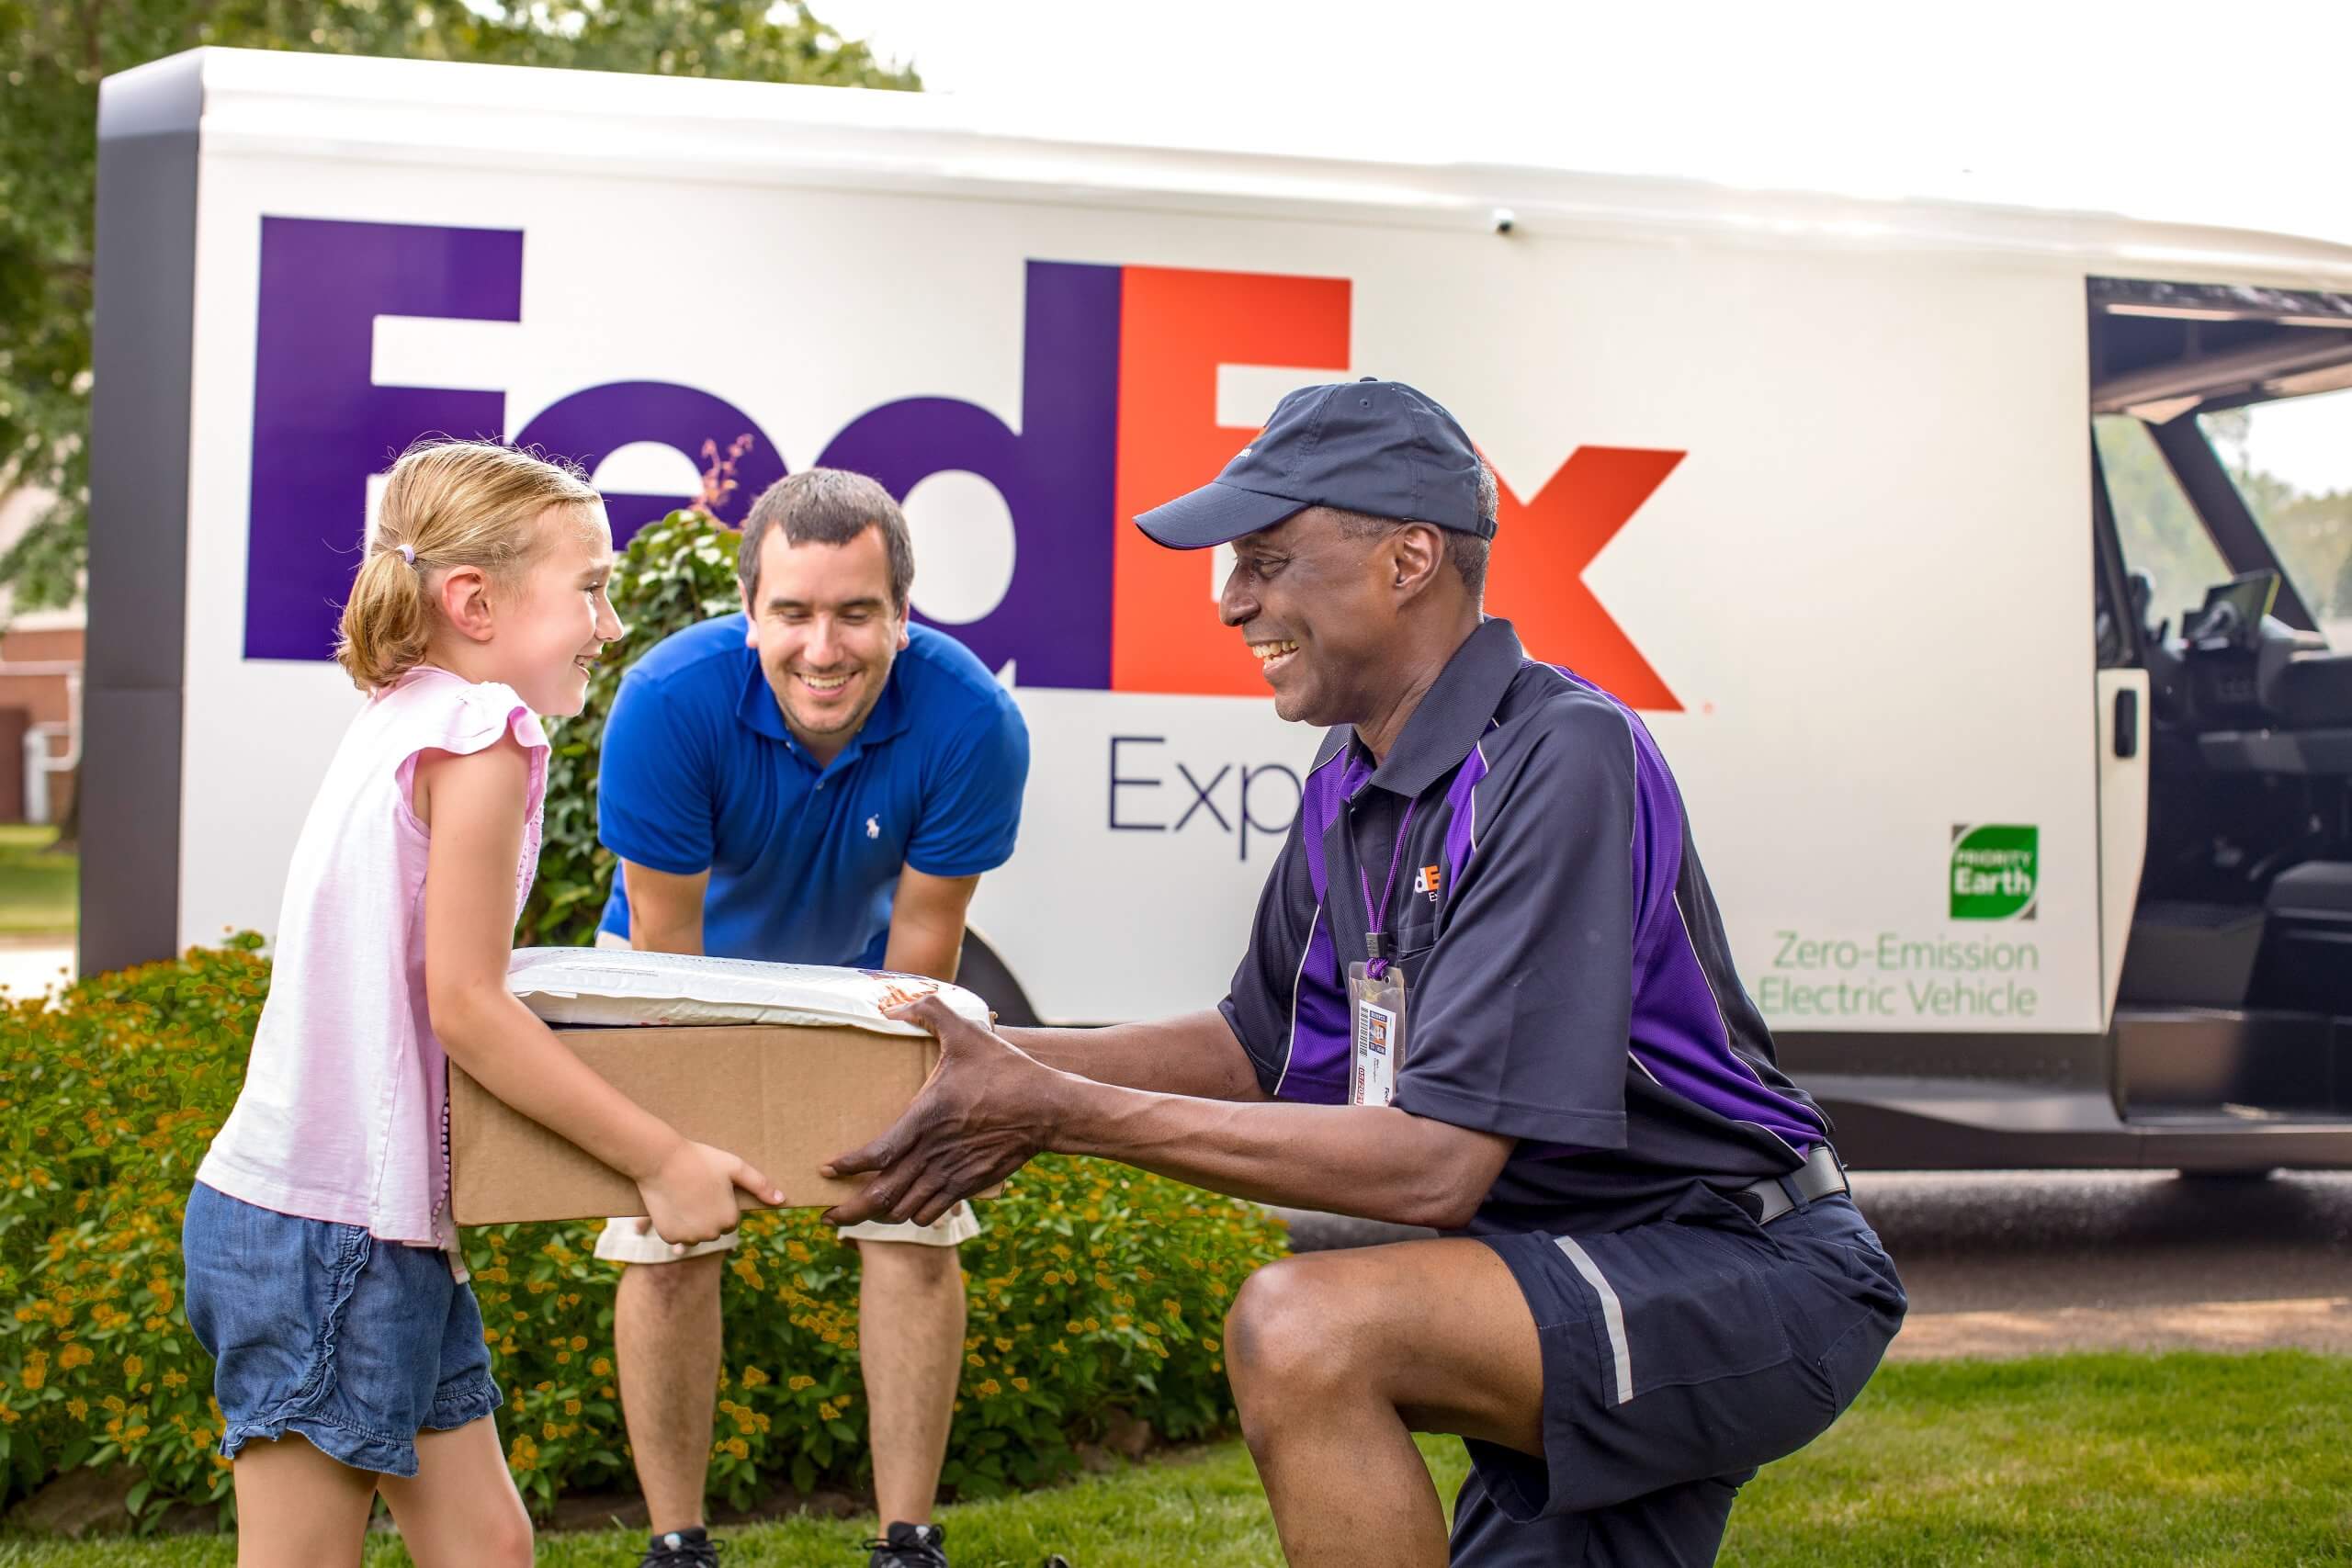 A Fedex delivery man on the right, ,handing a parcel to a girl on the left and her father. There is a Fedex van in the rear of the shot.